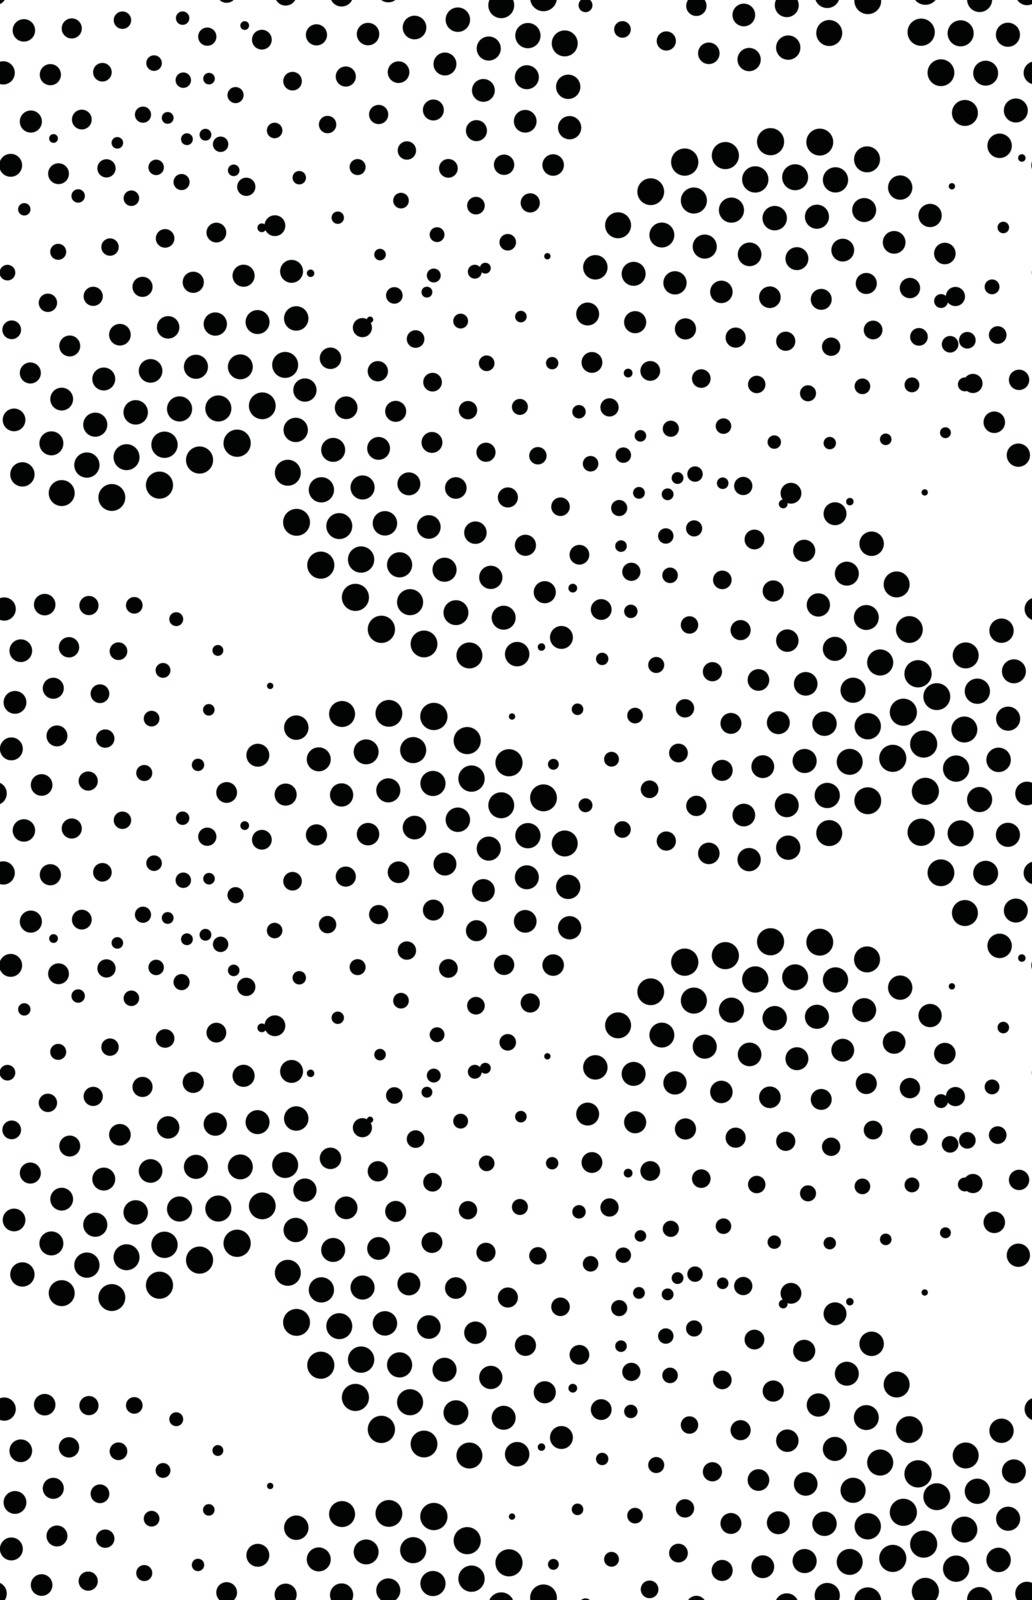 Vector geometric seamless pattern. Repeating abstract dots by Softulka